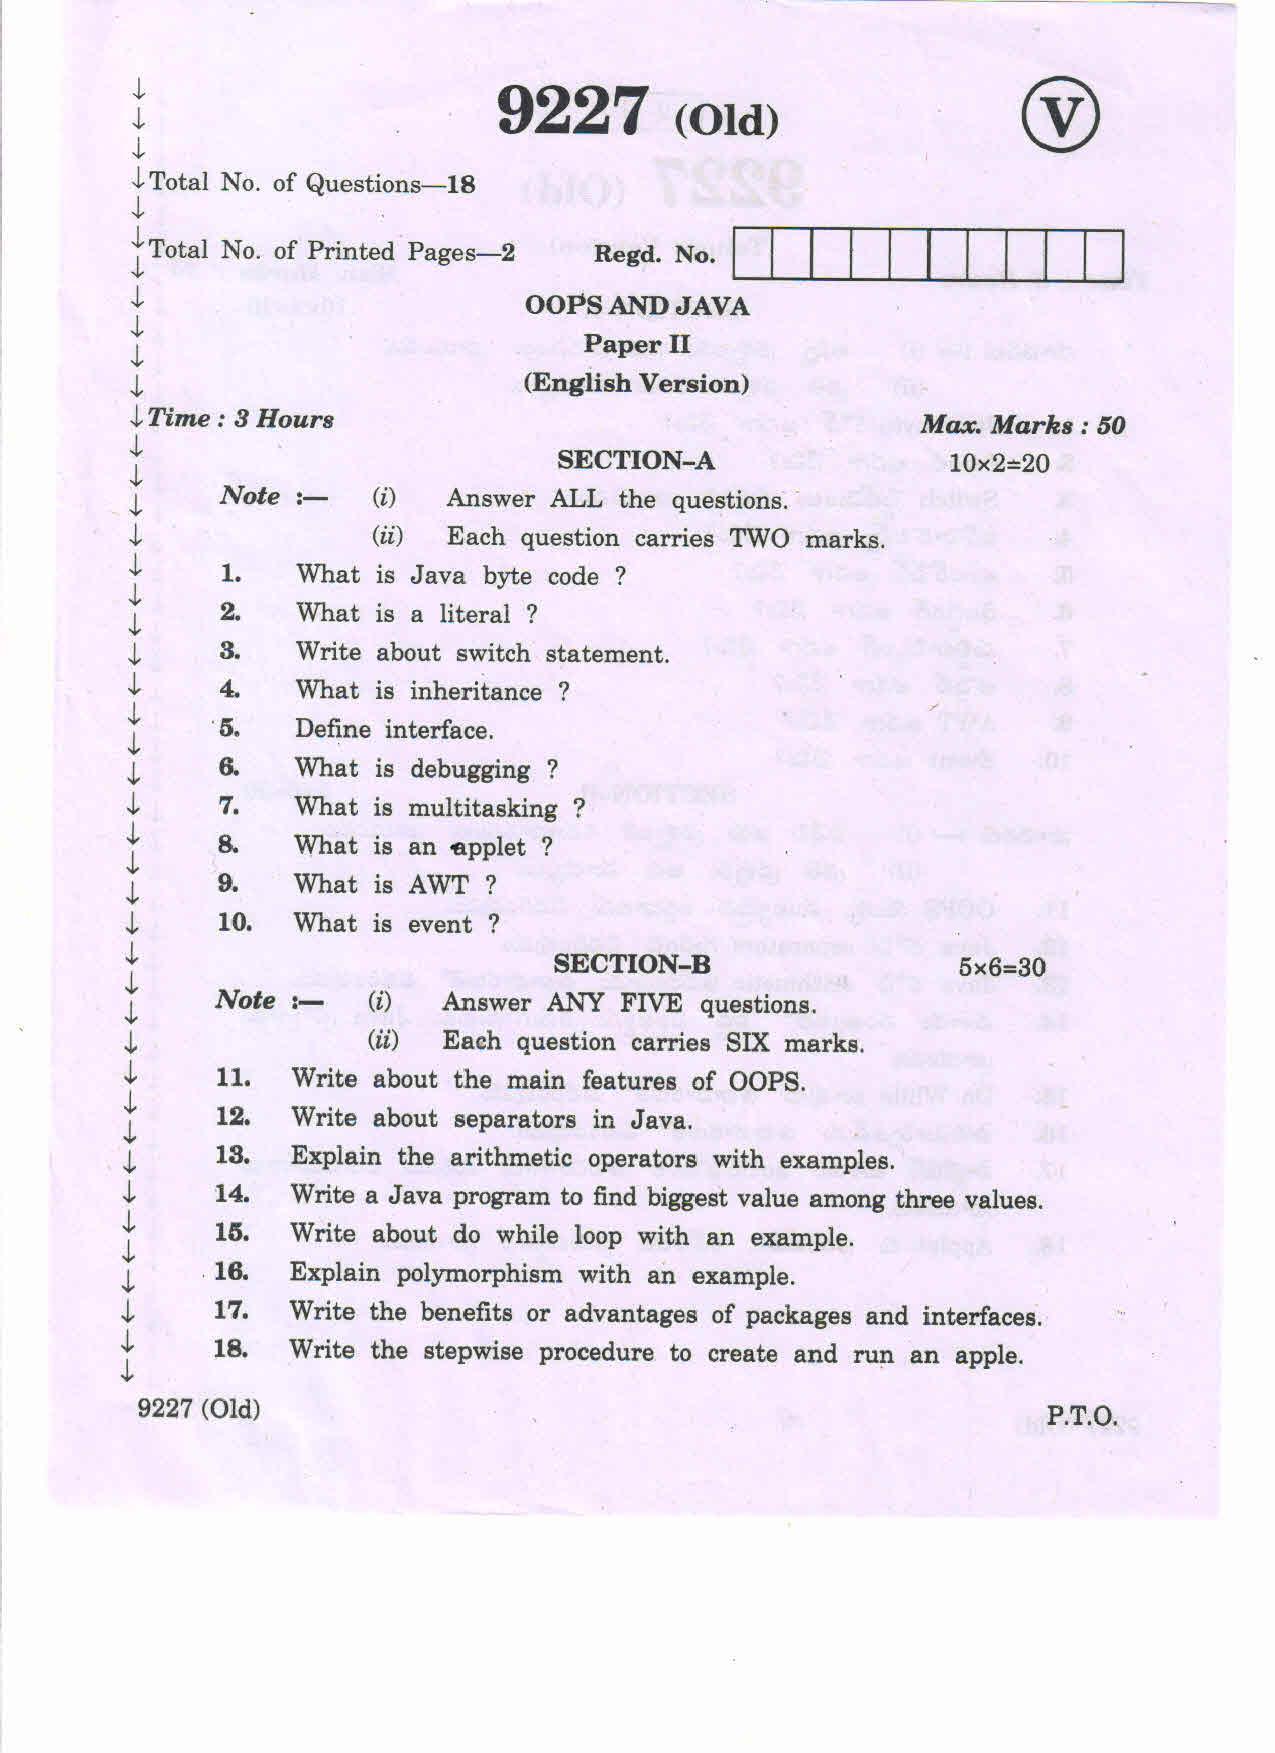 AP Inter 2nd Year Vocational Question Paper March - 2020 - Oops and Java - II (old) - Page 1